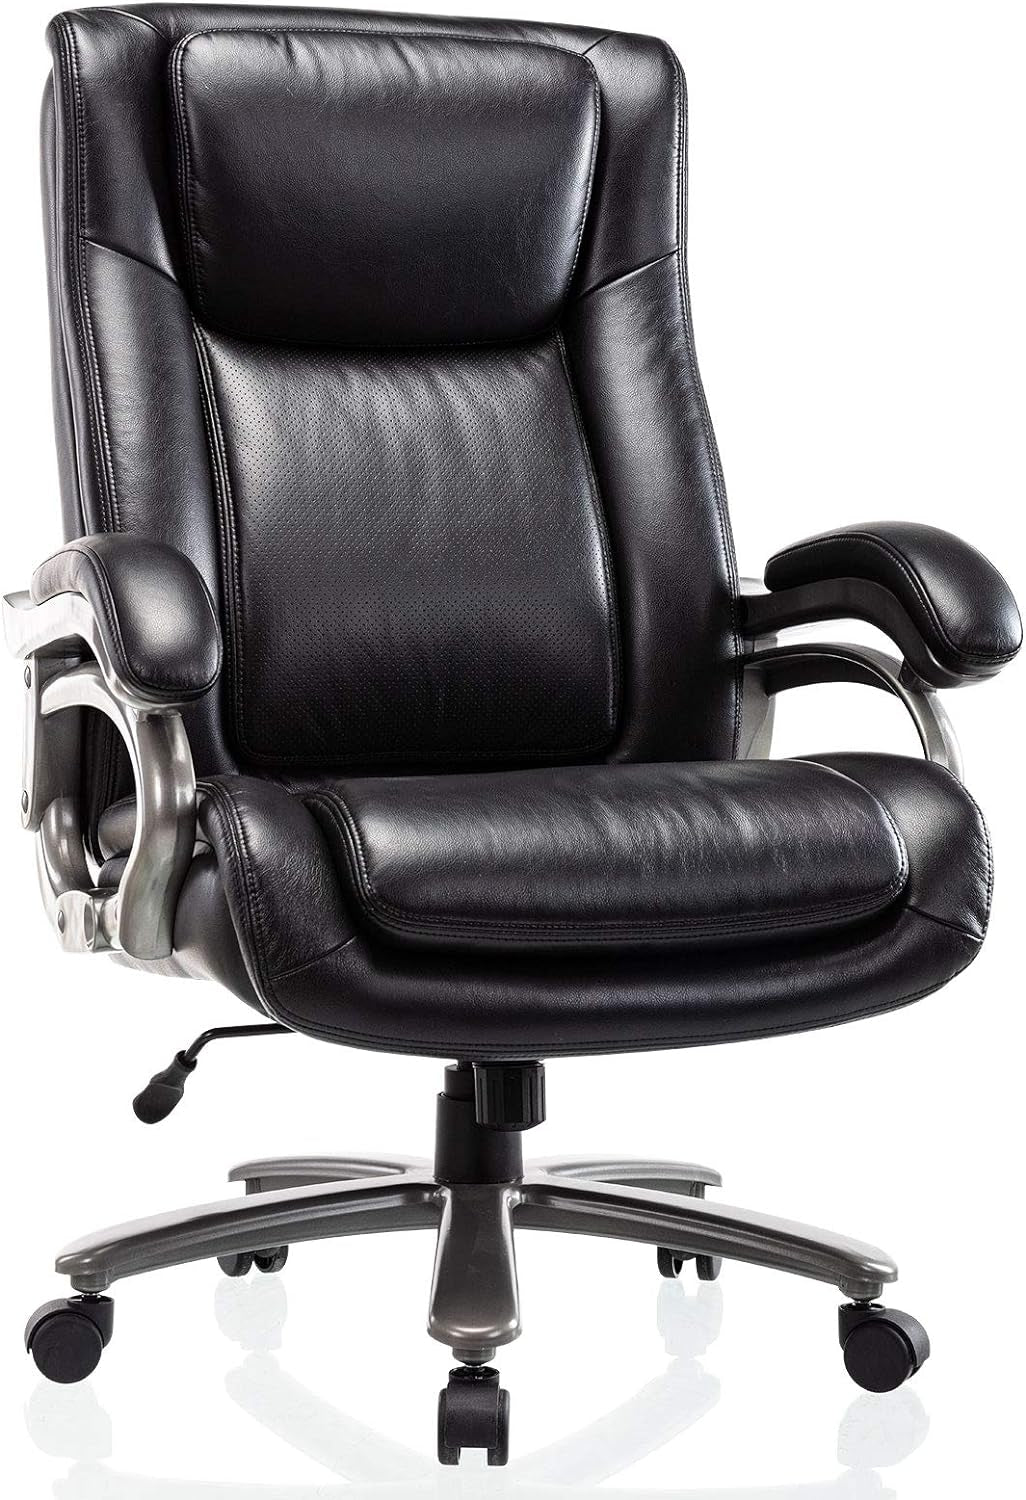 Big & Tall 400Lb Office Chair - High Back Executive Computer Chair Heavy Duty Metal Base and Adjustable Tilt Angle Large Bonded Leather Desk Swivel Chair, Ergonomic Design for Lumbar Support (Black)